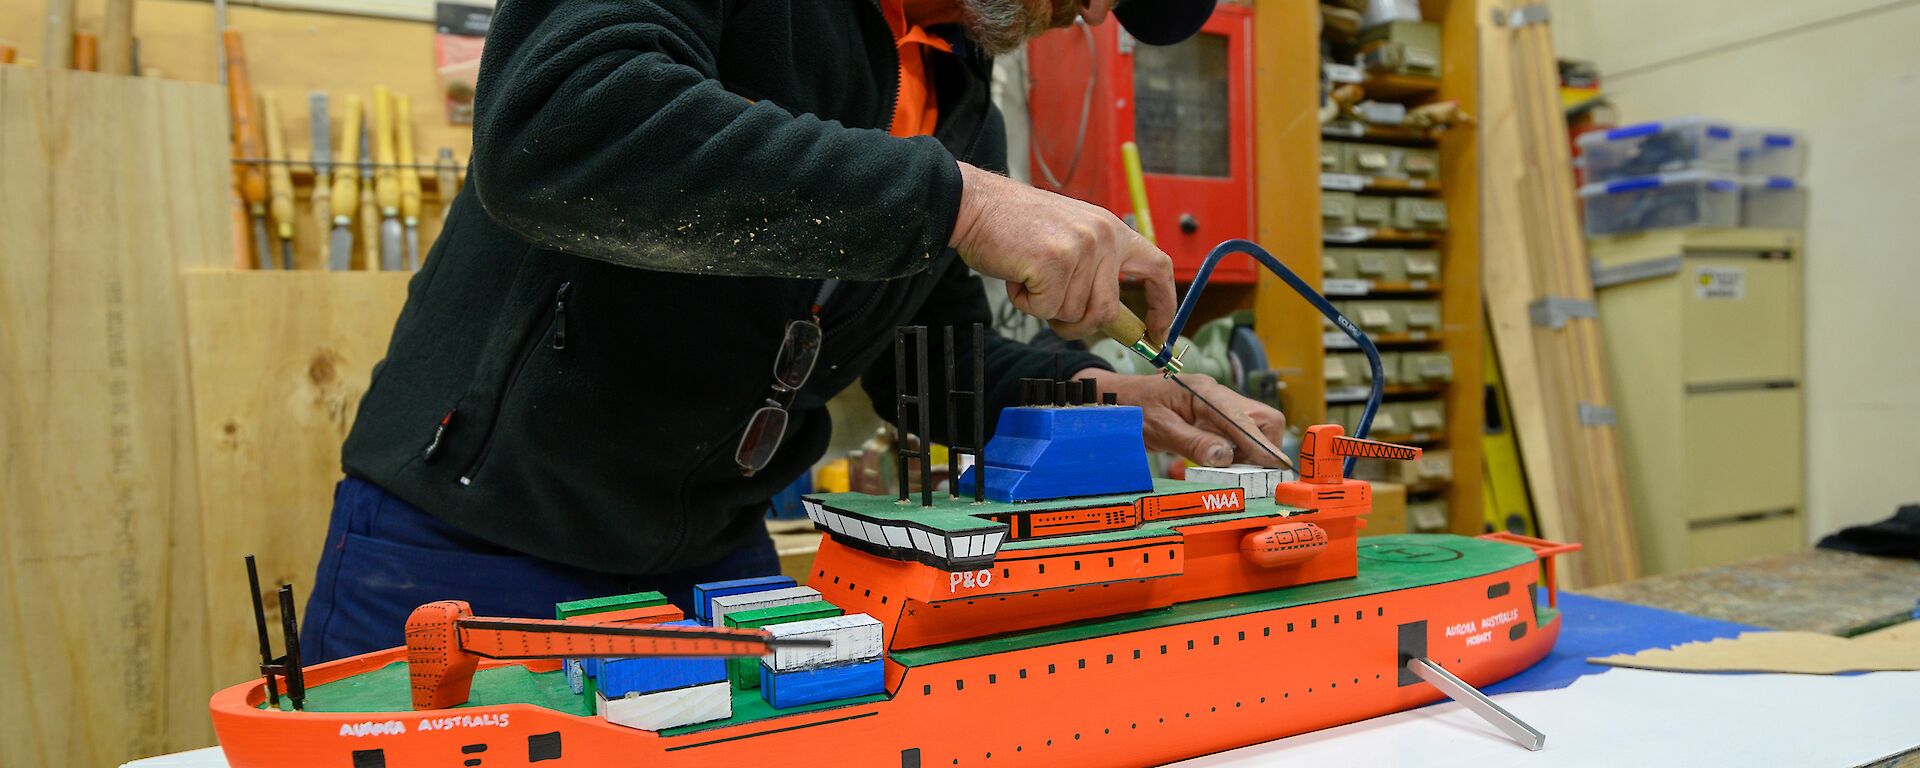 Grant in the process of building a scale model of the Aurora Australis ship in the Davis workshop